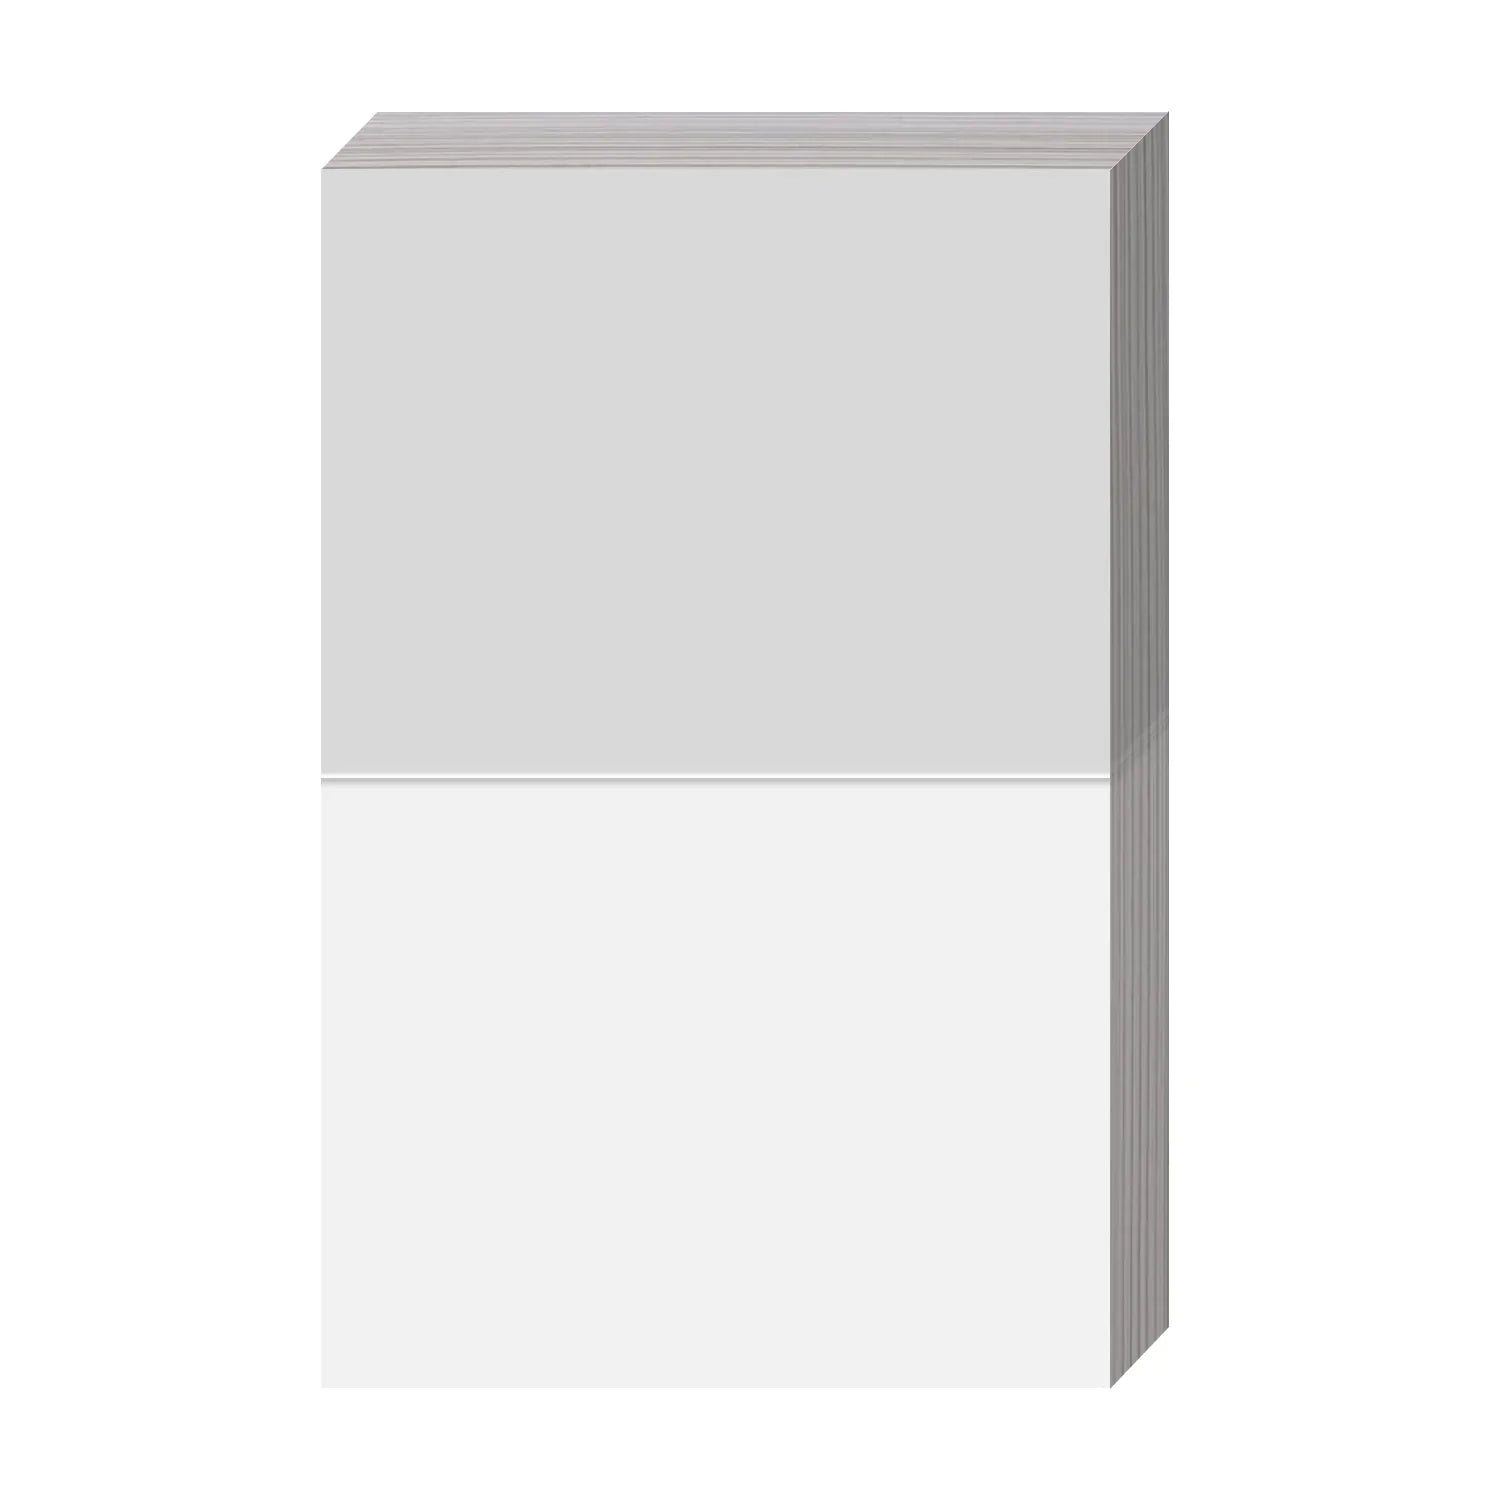 A2 Half-Fold White Greeting Cards | Heavyweight 80lb Cover | 4 1/4" x 5 1/2" | 50 Per Pack FoldCard